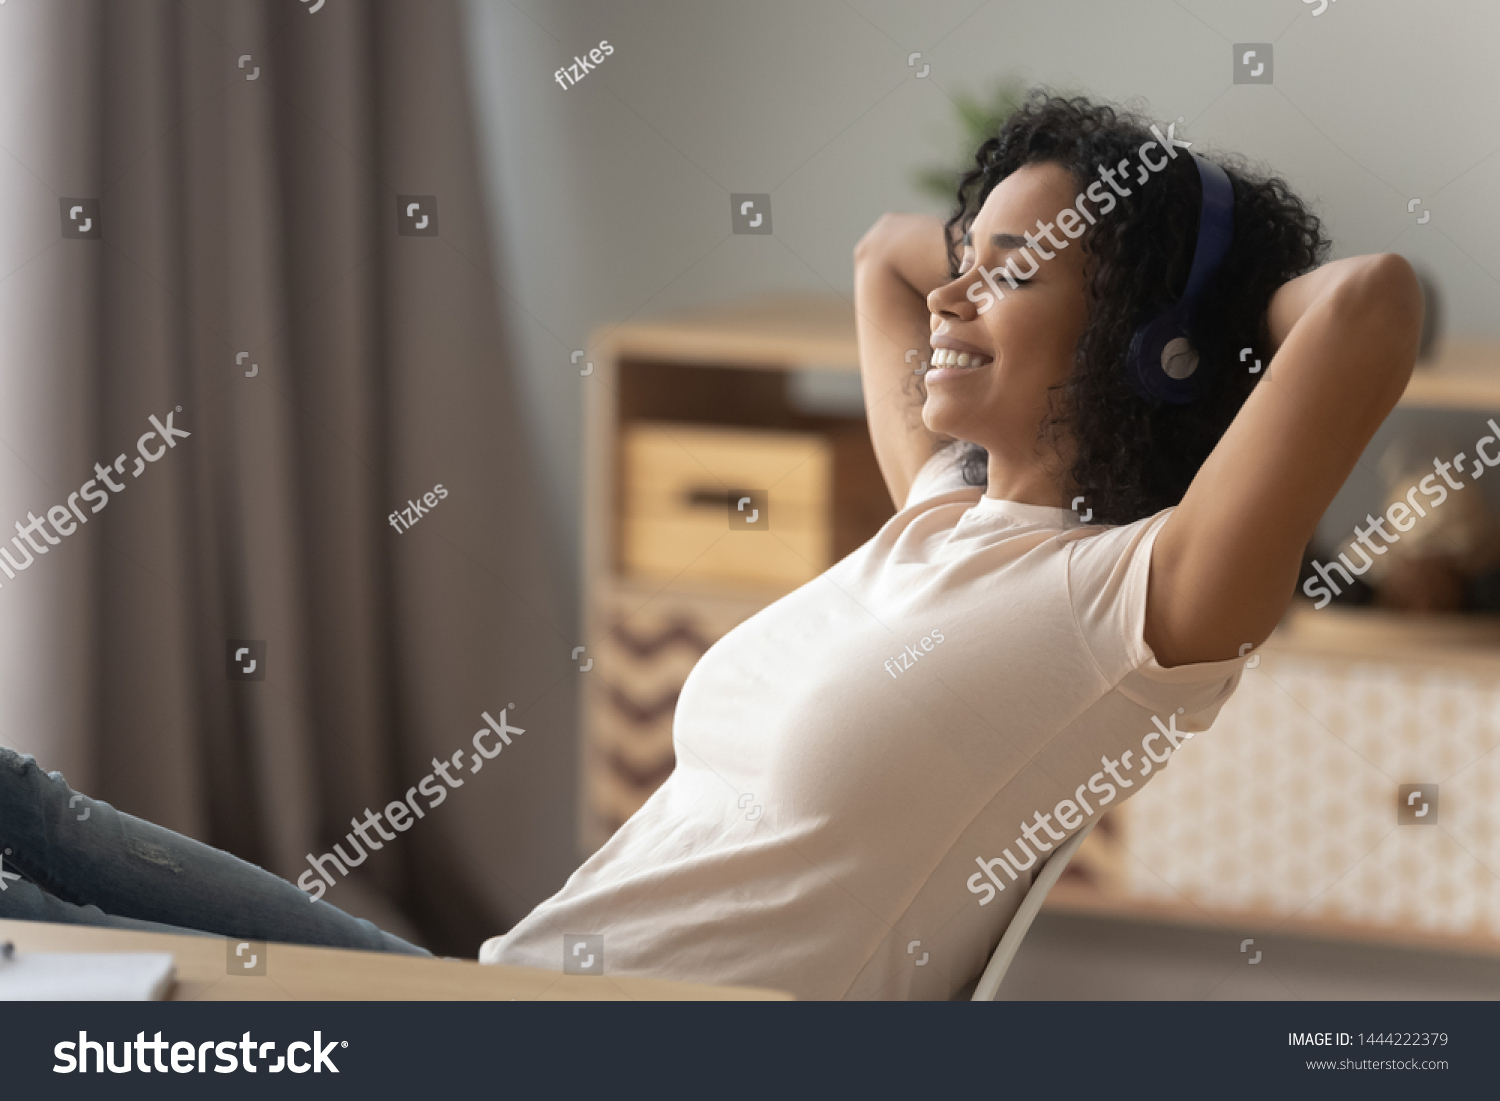 Happy african american girl wearing headphones relaxing listening to music taking break at work, calm smiling young black woman enjoying good lounge sound for stress relief sit at home office desk #1444222379